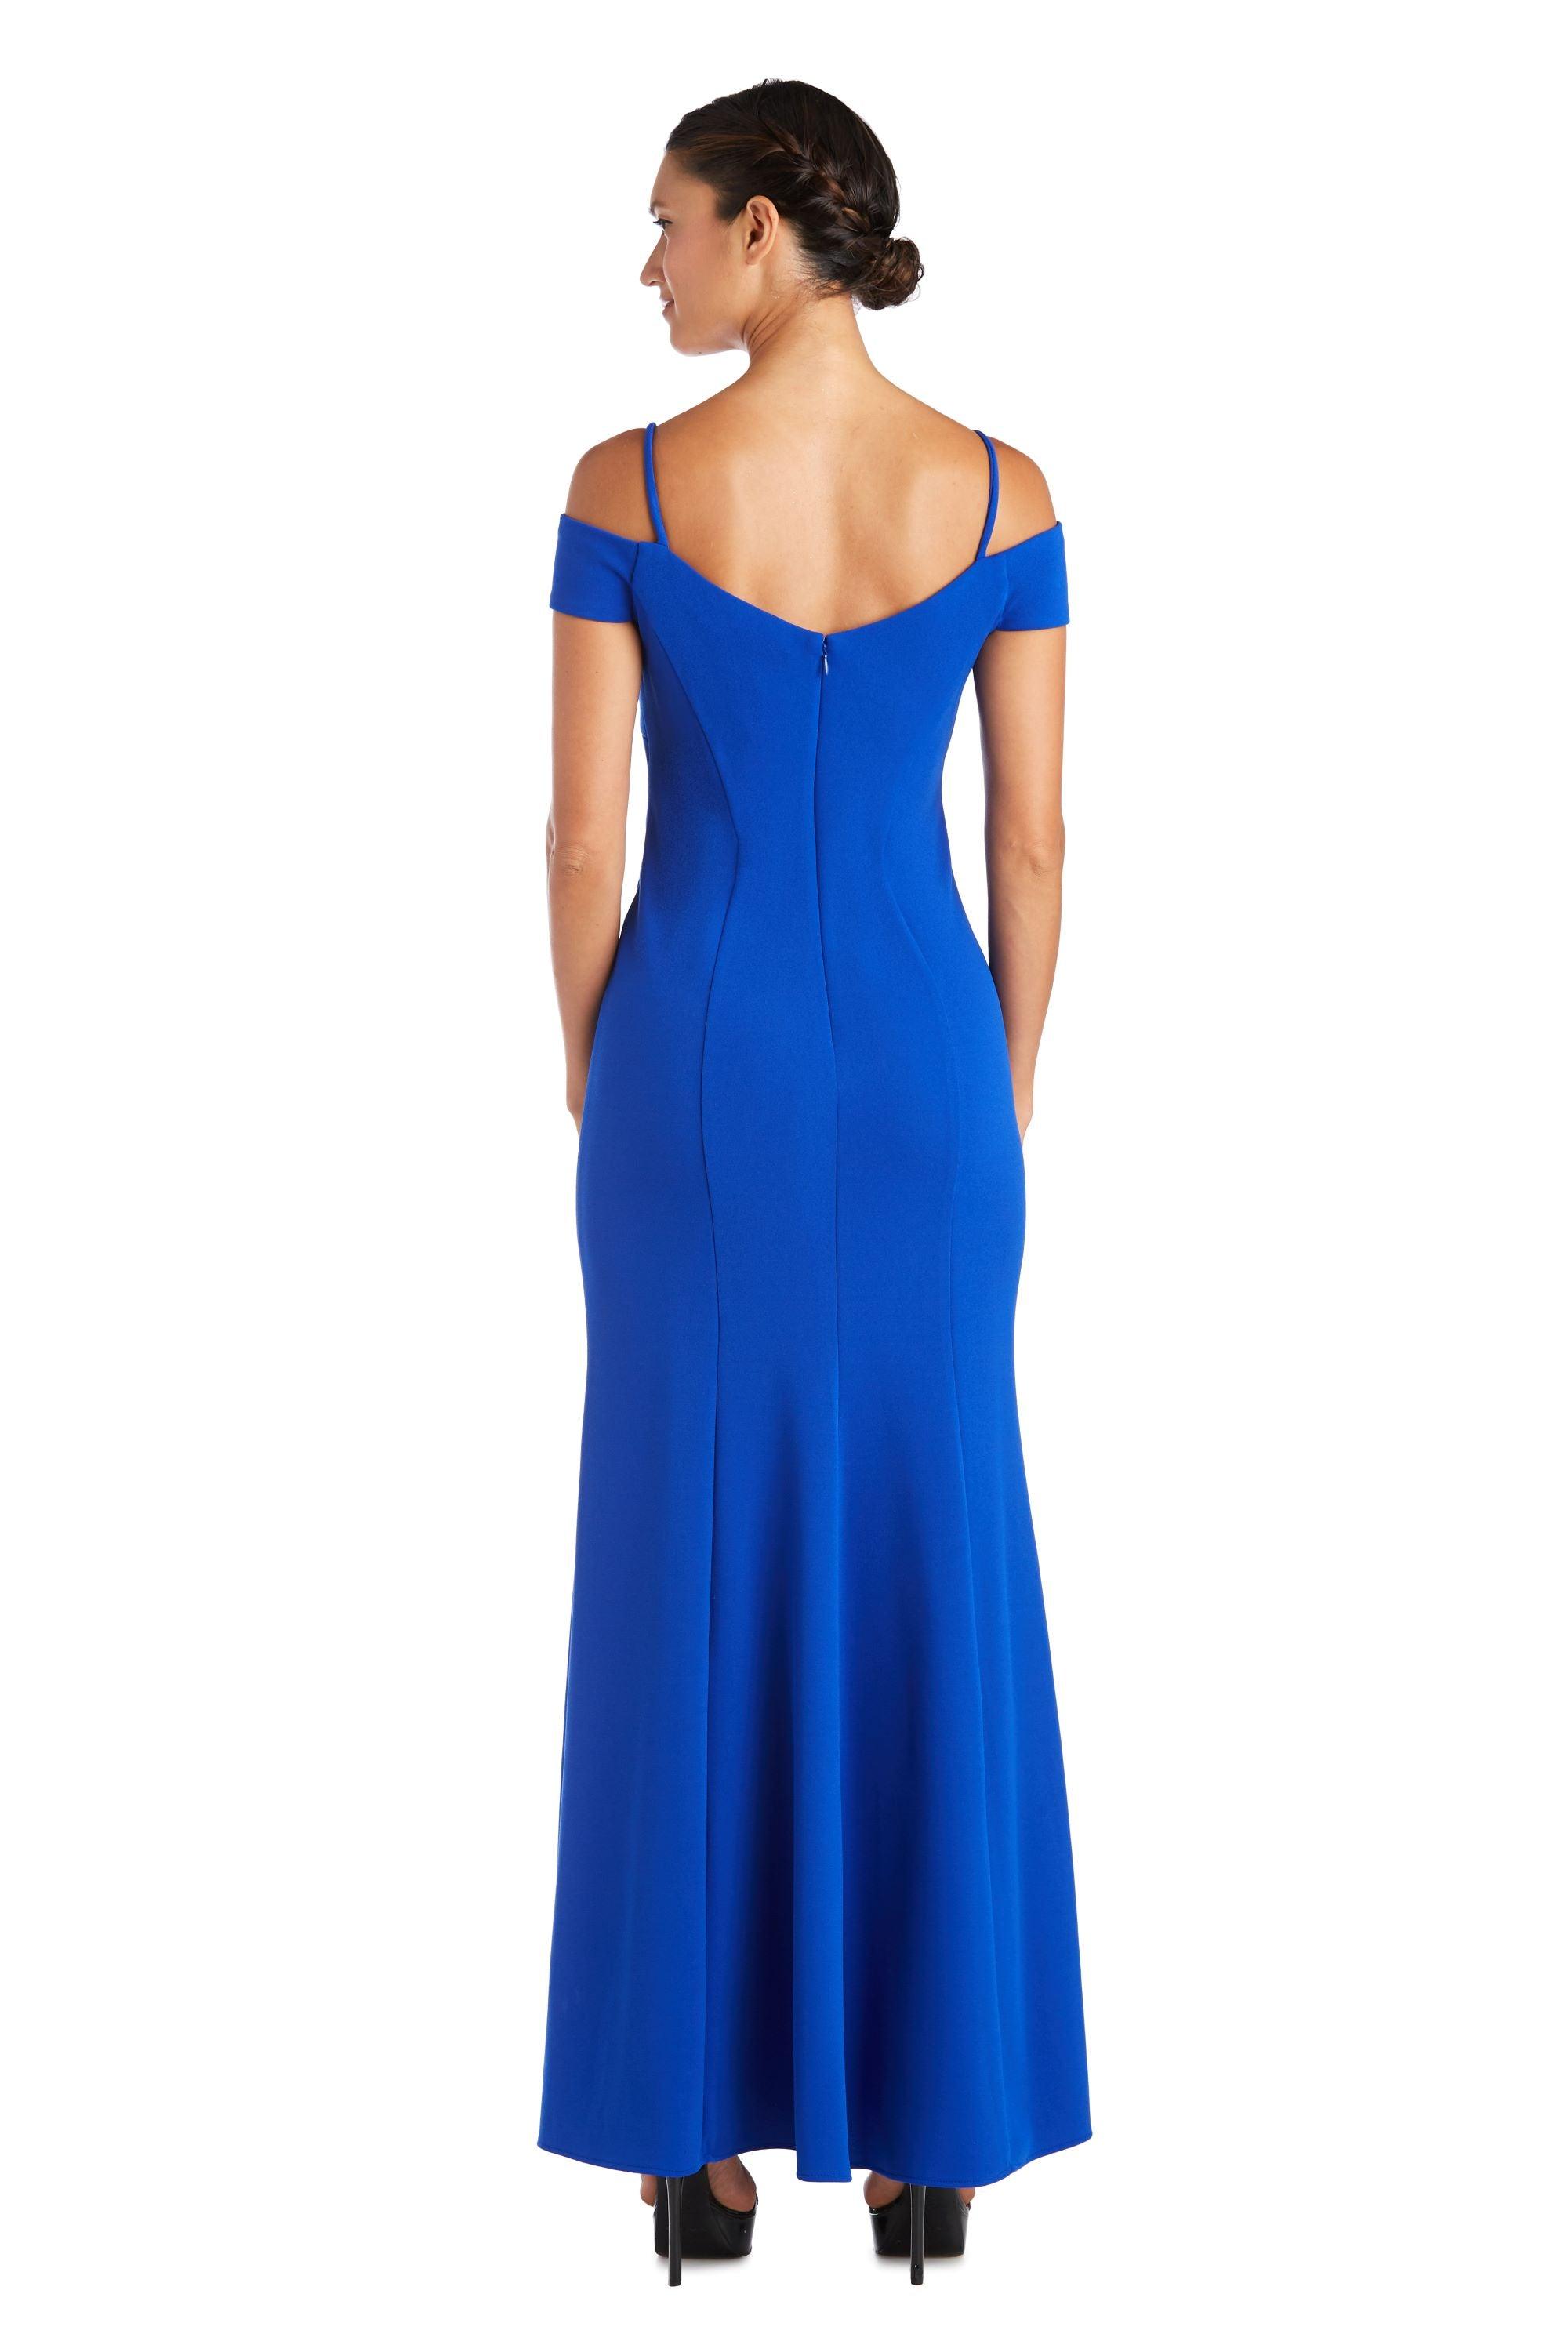 Nightway Long Formal Dress 21825 - The Dress Outlet